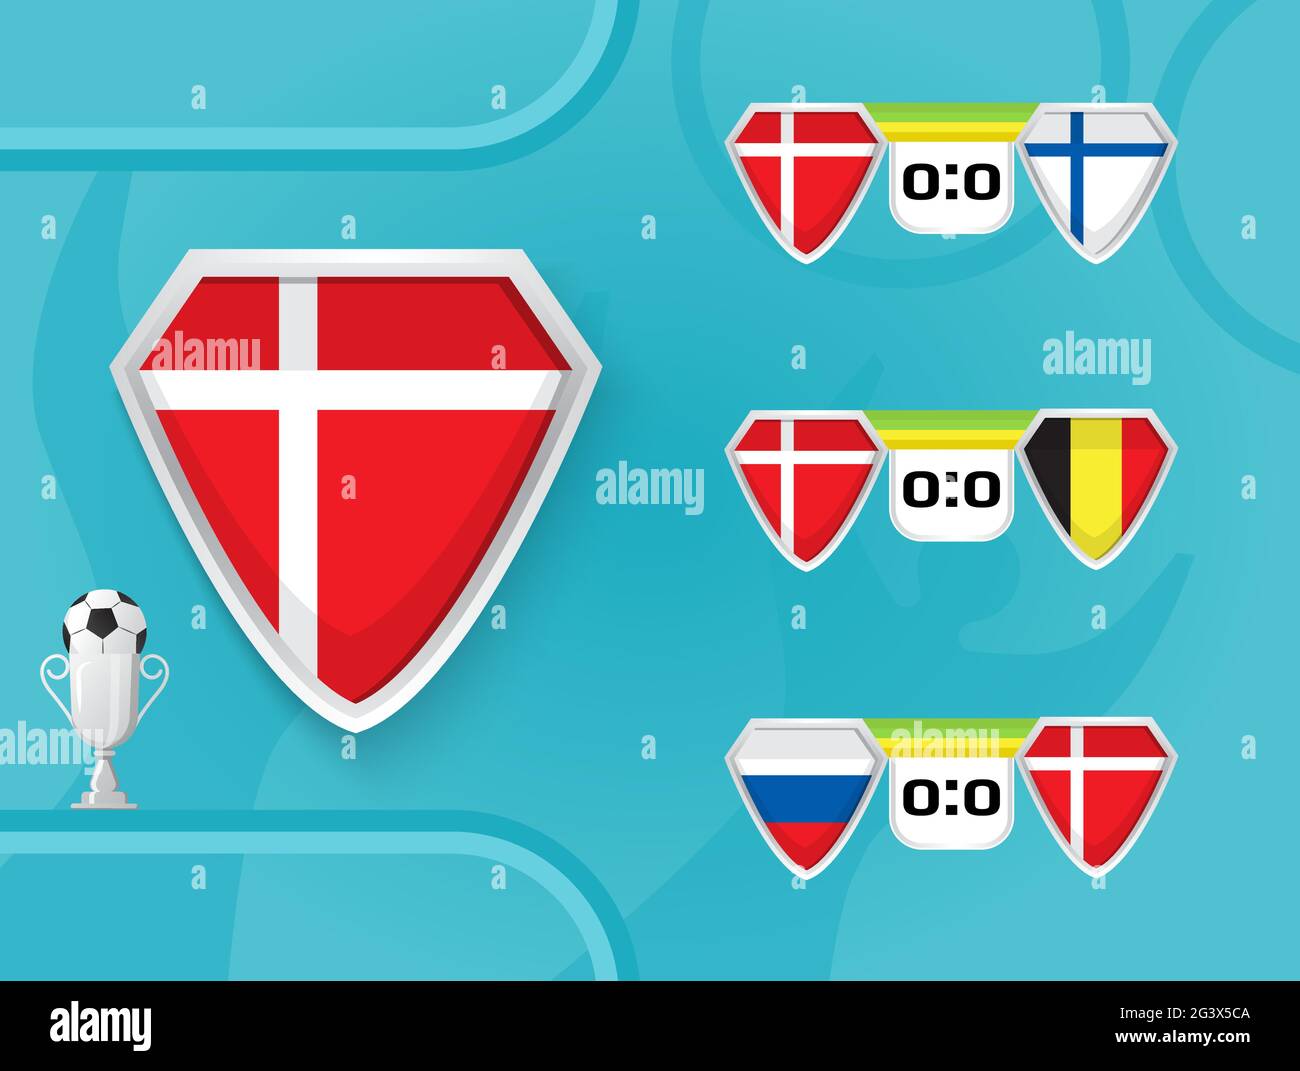 Schedule of national football team of Denmark matches in the European Championship 2020. Shields with the flag of Denmark, Finland, Belgium, Russia. Stock Vector